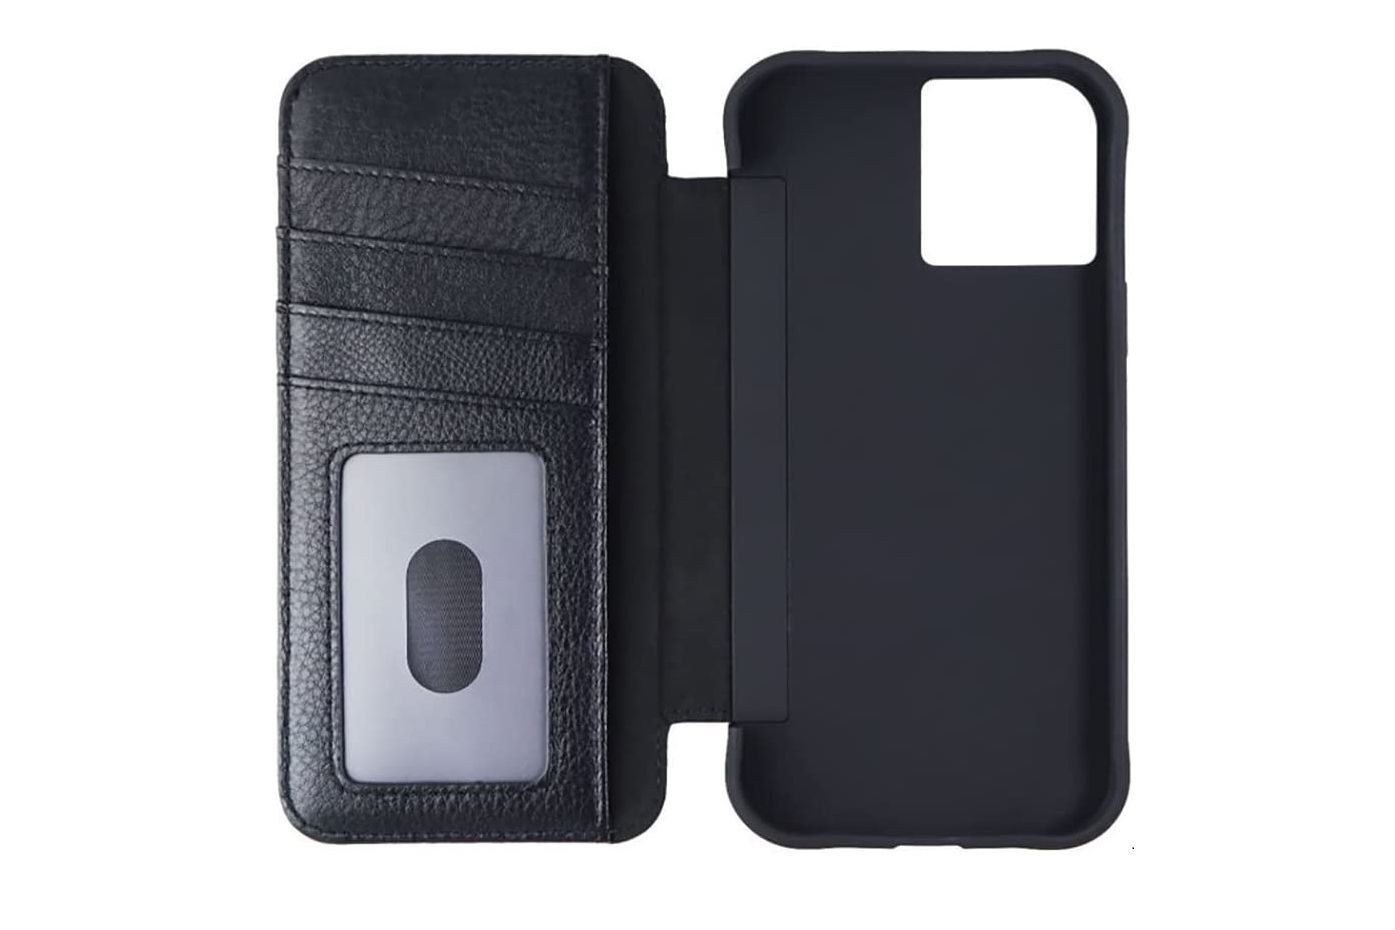 Case-Mate - Tough Leather Wallet Folio - The best iPhone 12 Pro Max cases in 2022 - updated October